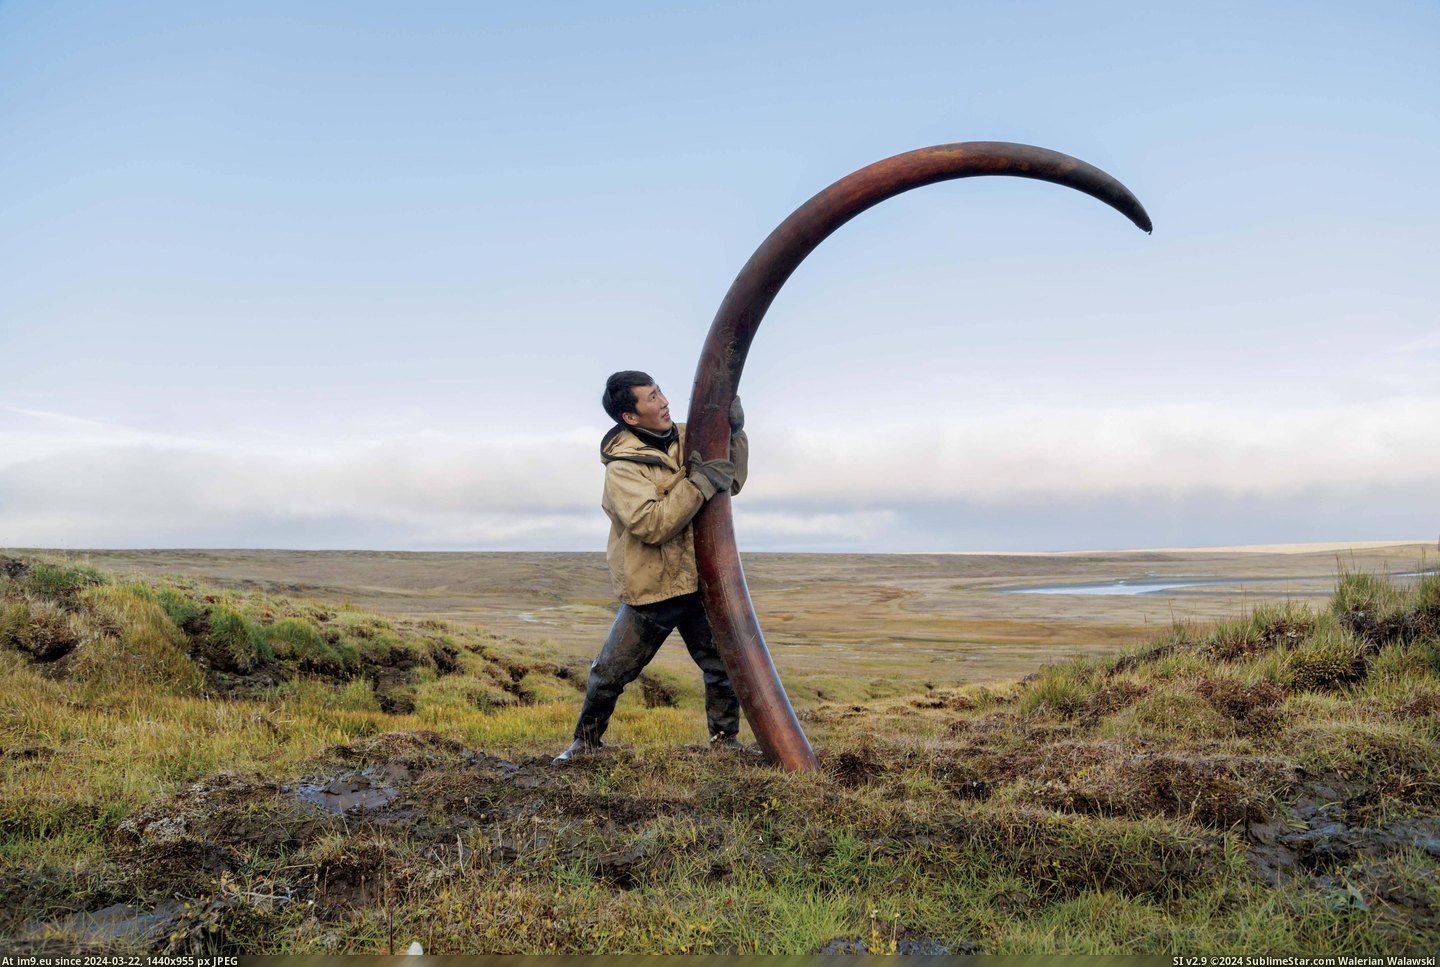 #Tusk #Siberian #Mammoth [Pics] A woolly mammoth's tusk is unearthed from a Siberian riverbed Pic. (Bild von album My r/PICS favs))